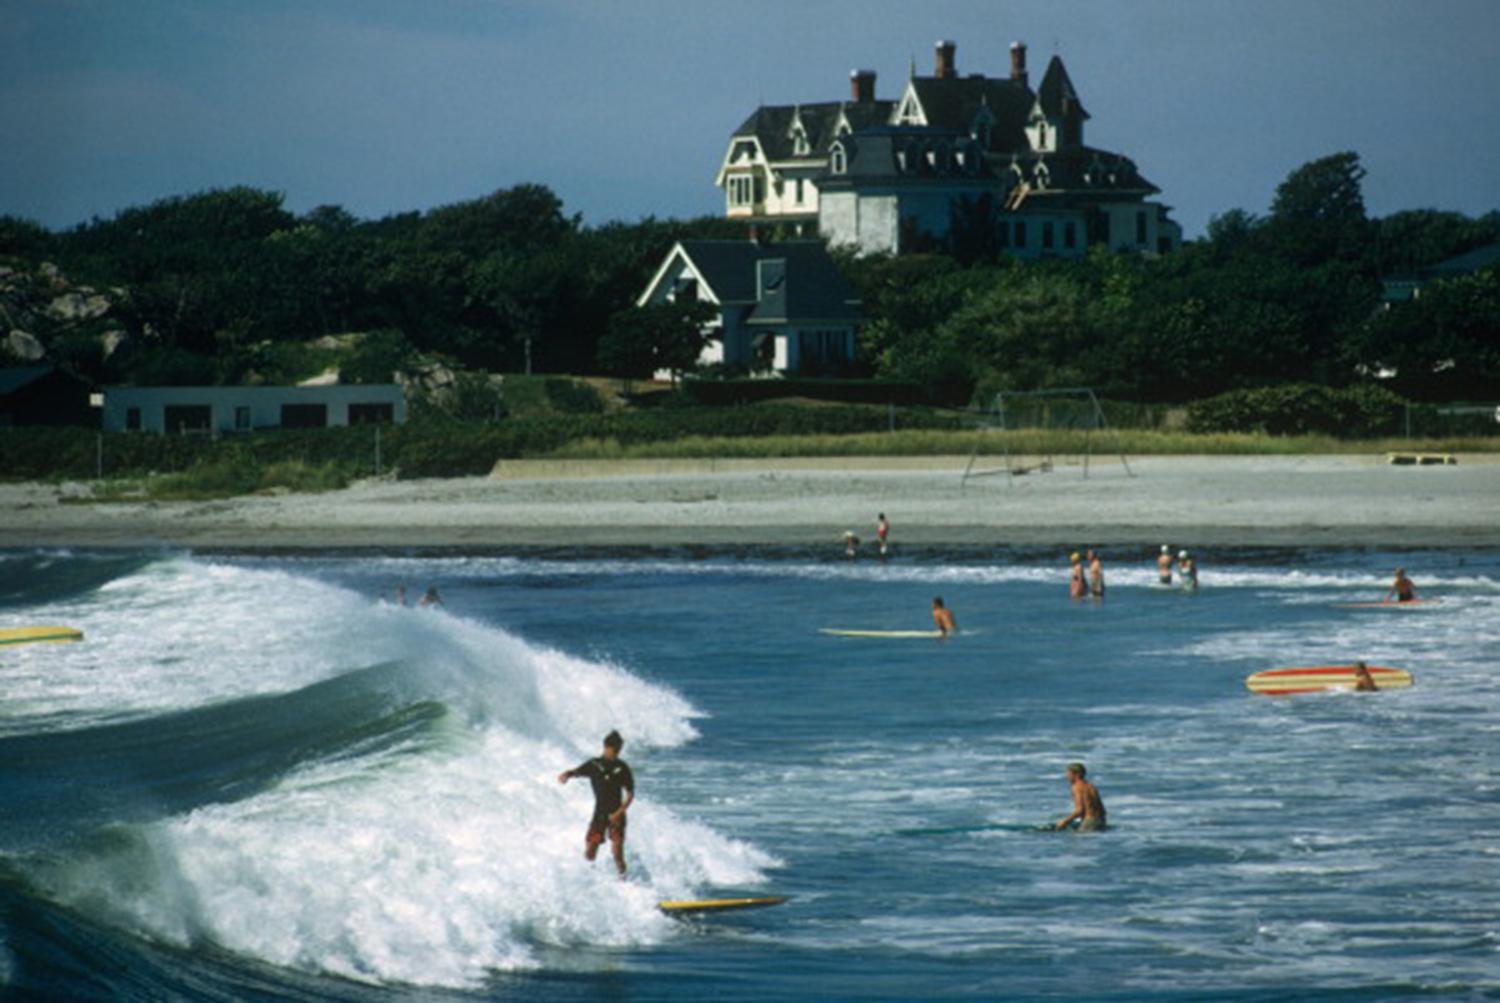 Surfers off Rhode Island, September 1965. (Photo by Slim Aarons/Getty Images)

Slim Aarons Estate Edition, Certificate of Authenticity included
Numbered and stamped by the Slim Aarons Estate

Modern estate edition with estate blindstamp signature